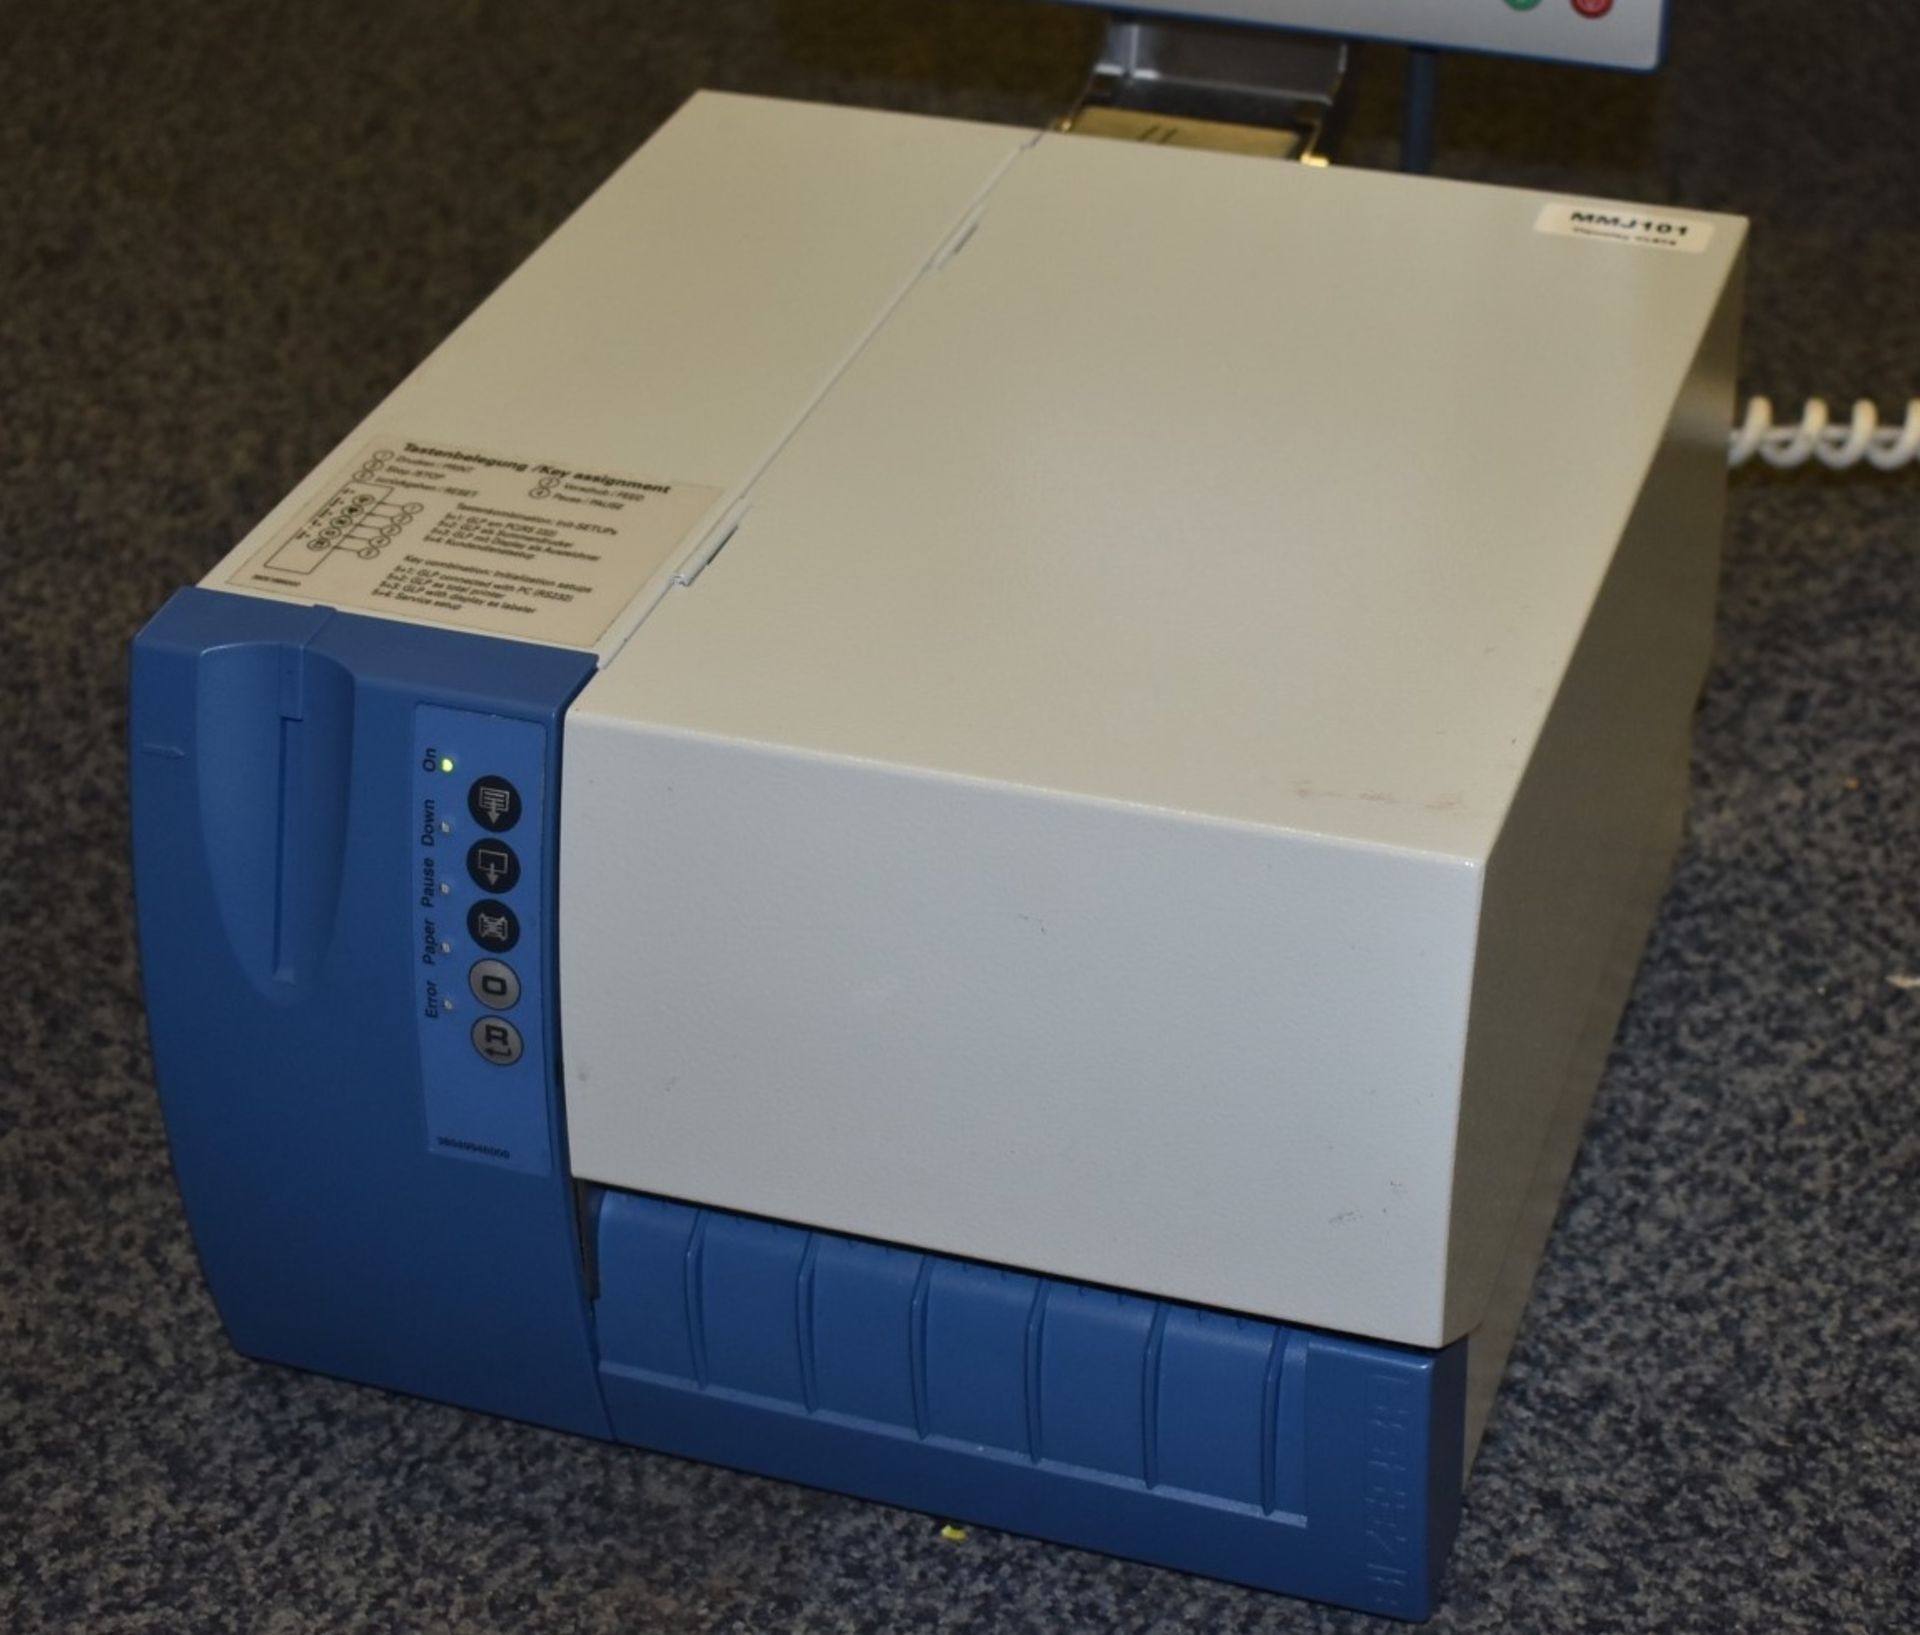 1 x Bizerba Industrial Label Printer GLPmaxx 160 With Colour Screen - Recently Removed From a - Image 10 of 15